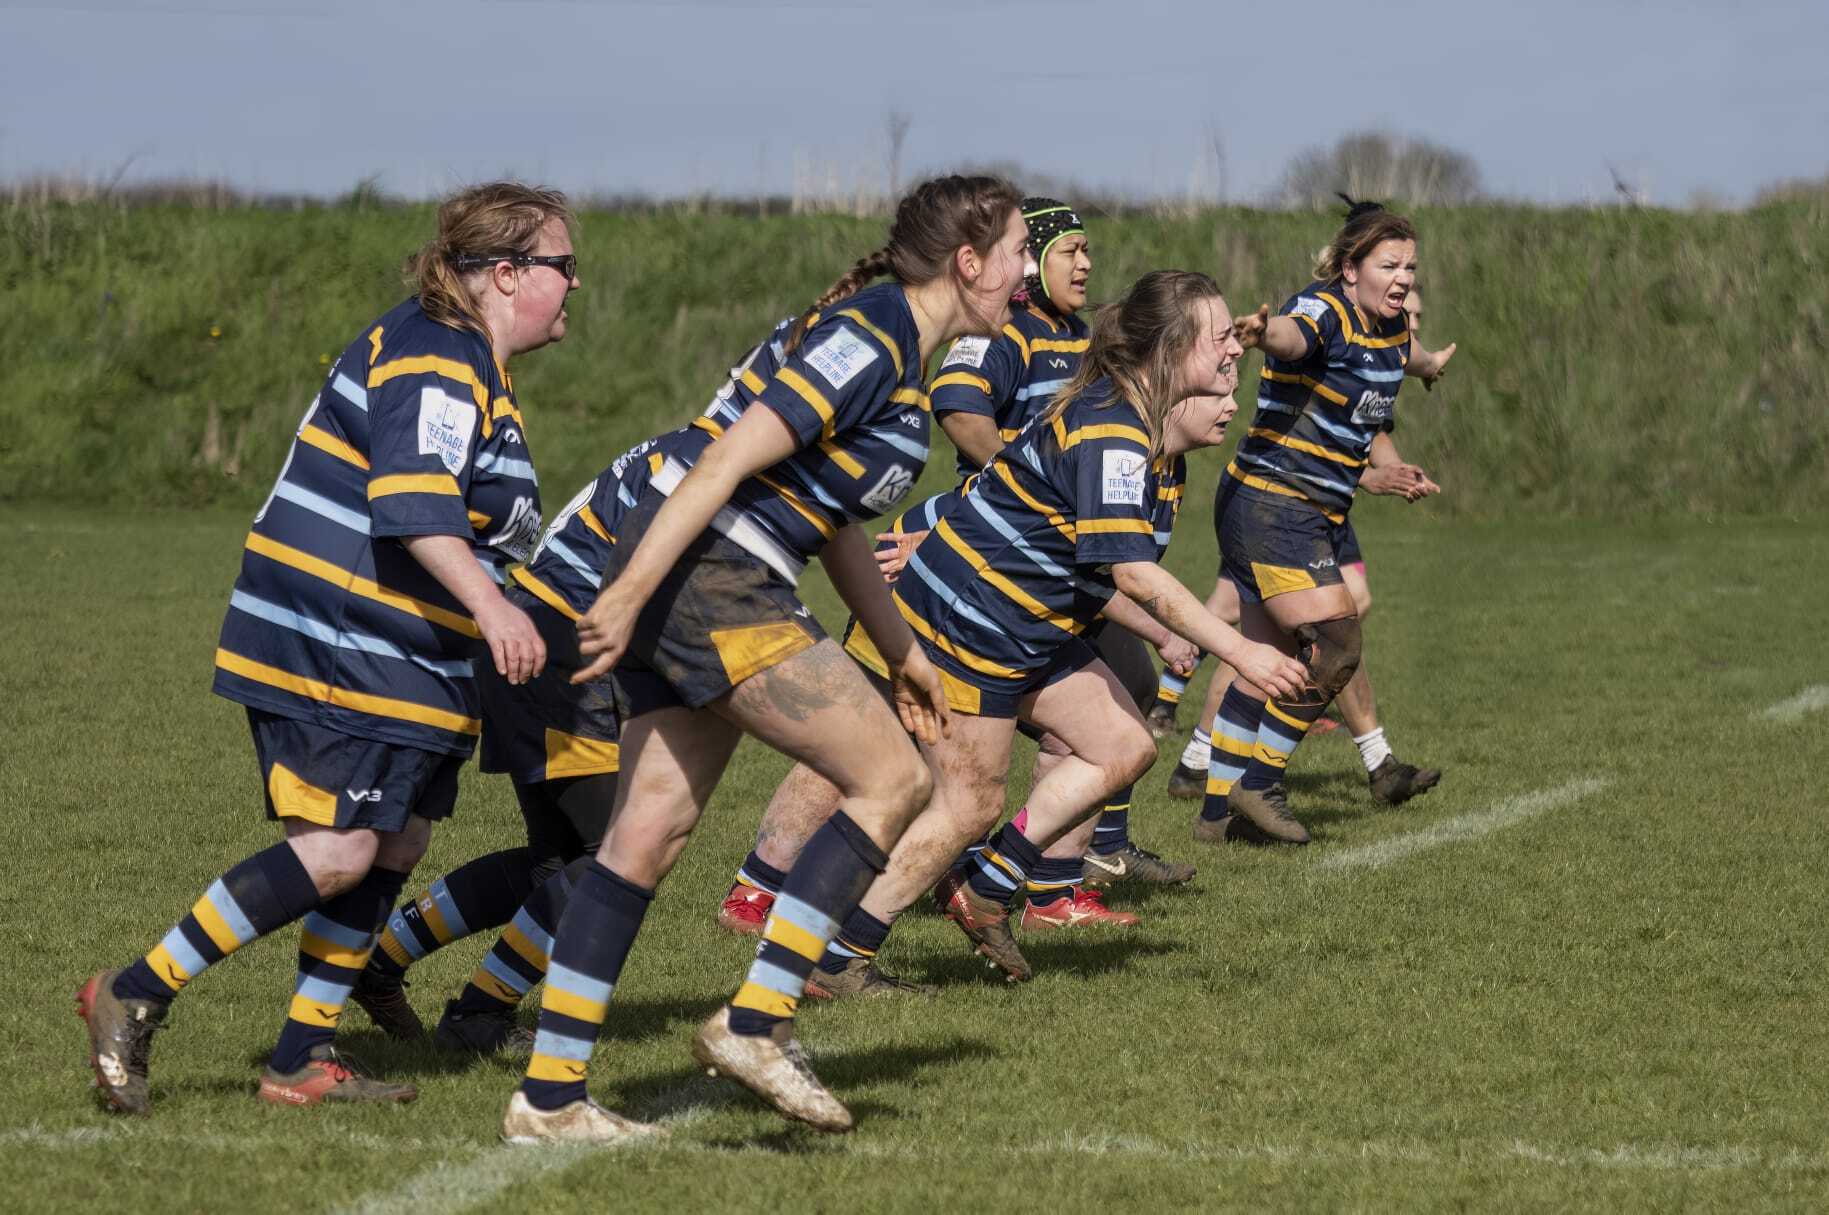 The Women’s Trowbridge Rugby Team were completing their regular training in a field opposite